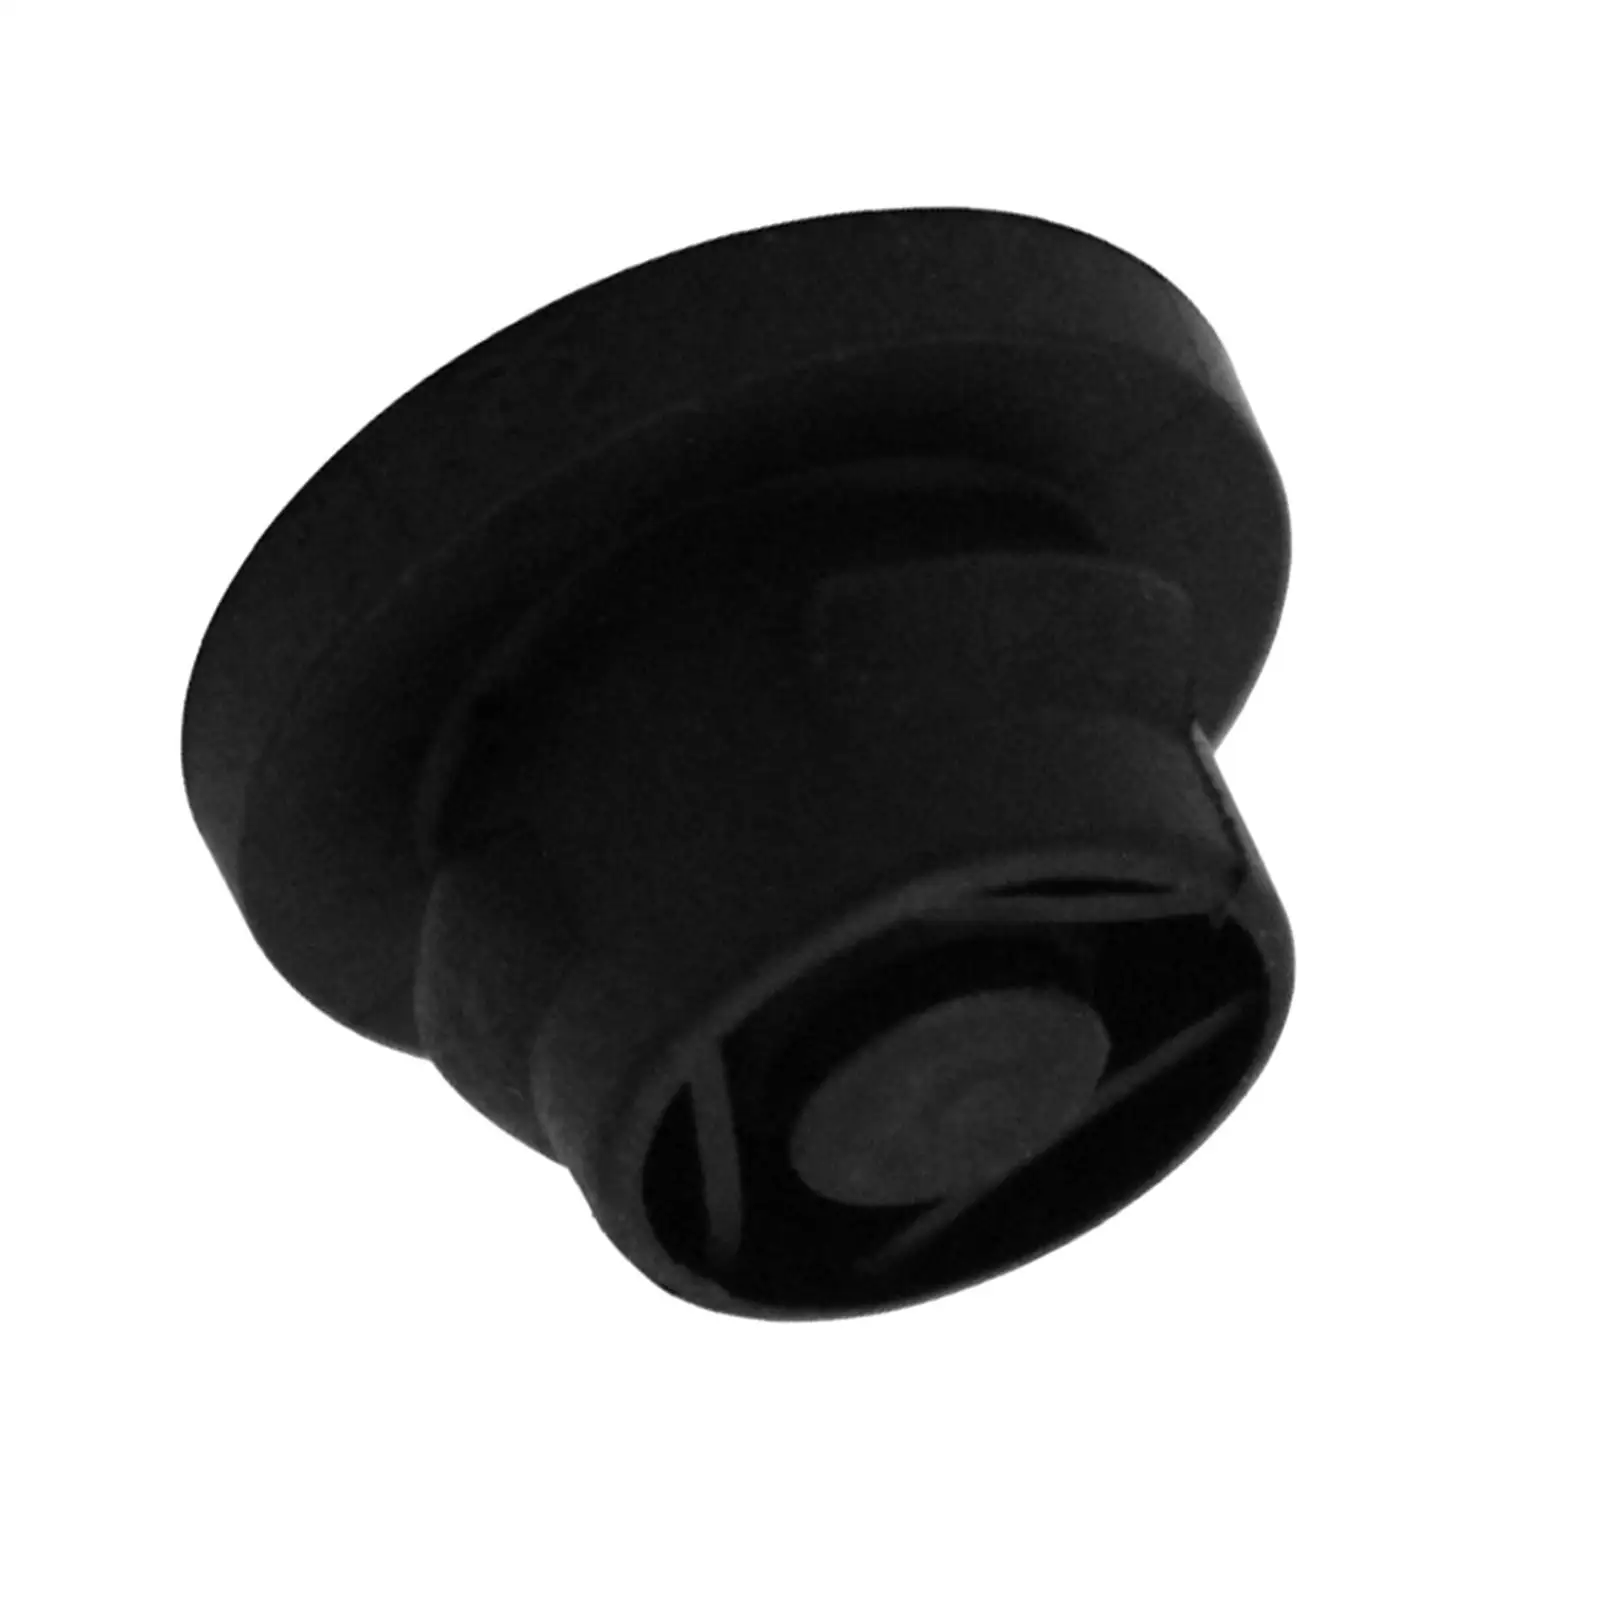 Automotive Air Filter Rubber Insert, Accessories 1422A3 1422.A3 Fit for Citroen 1.6 Hdi C3 C4, for Peugeot Partner.